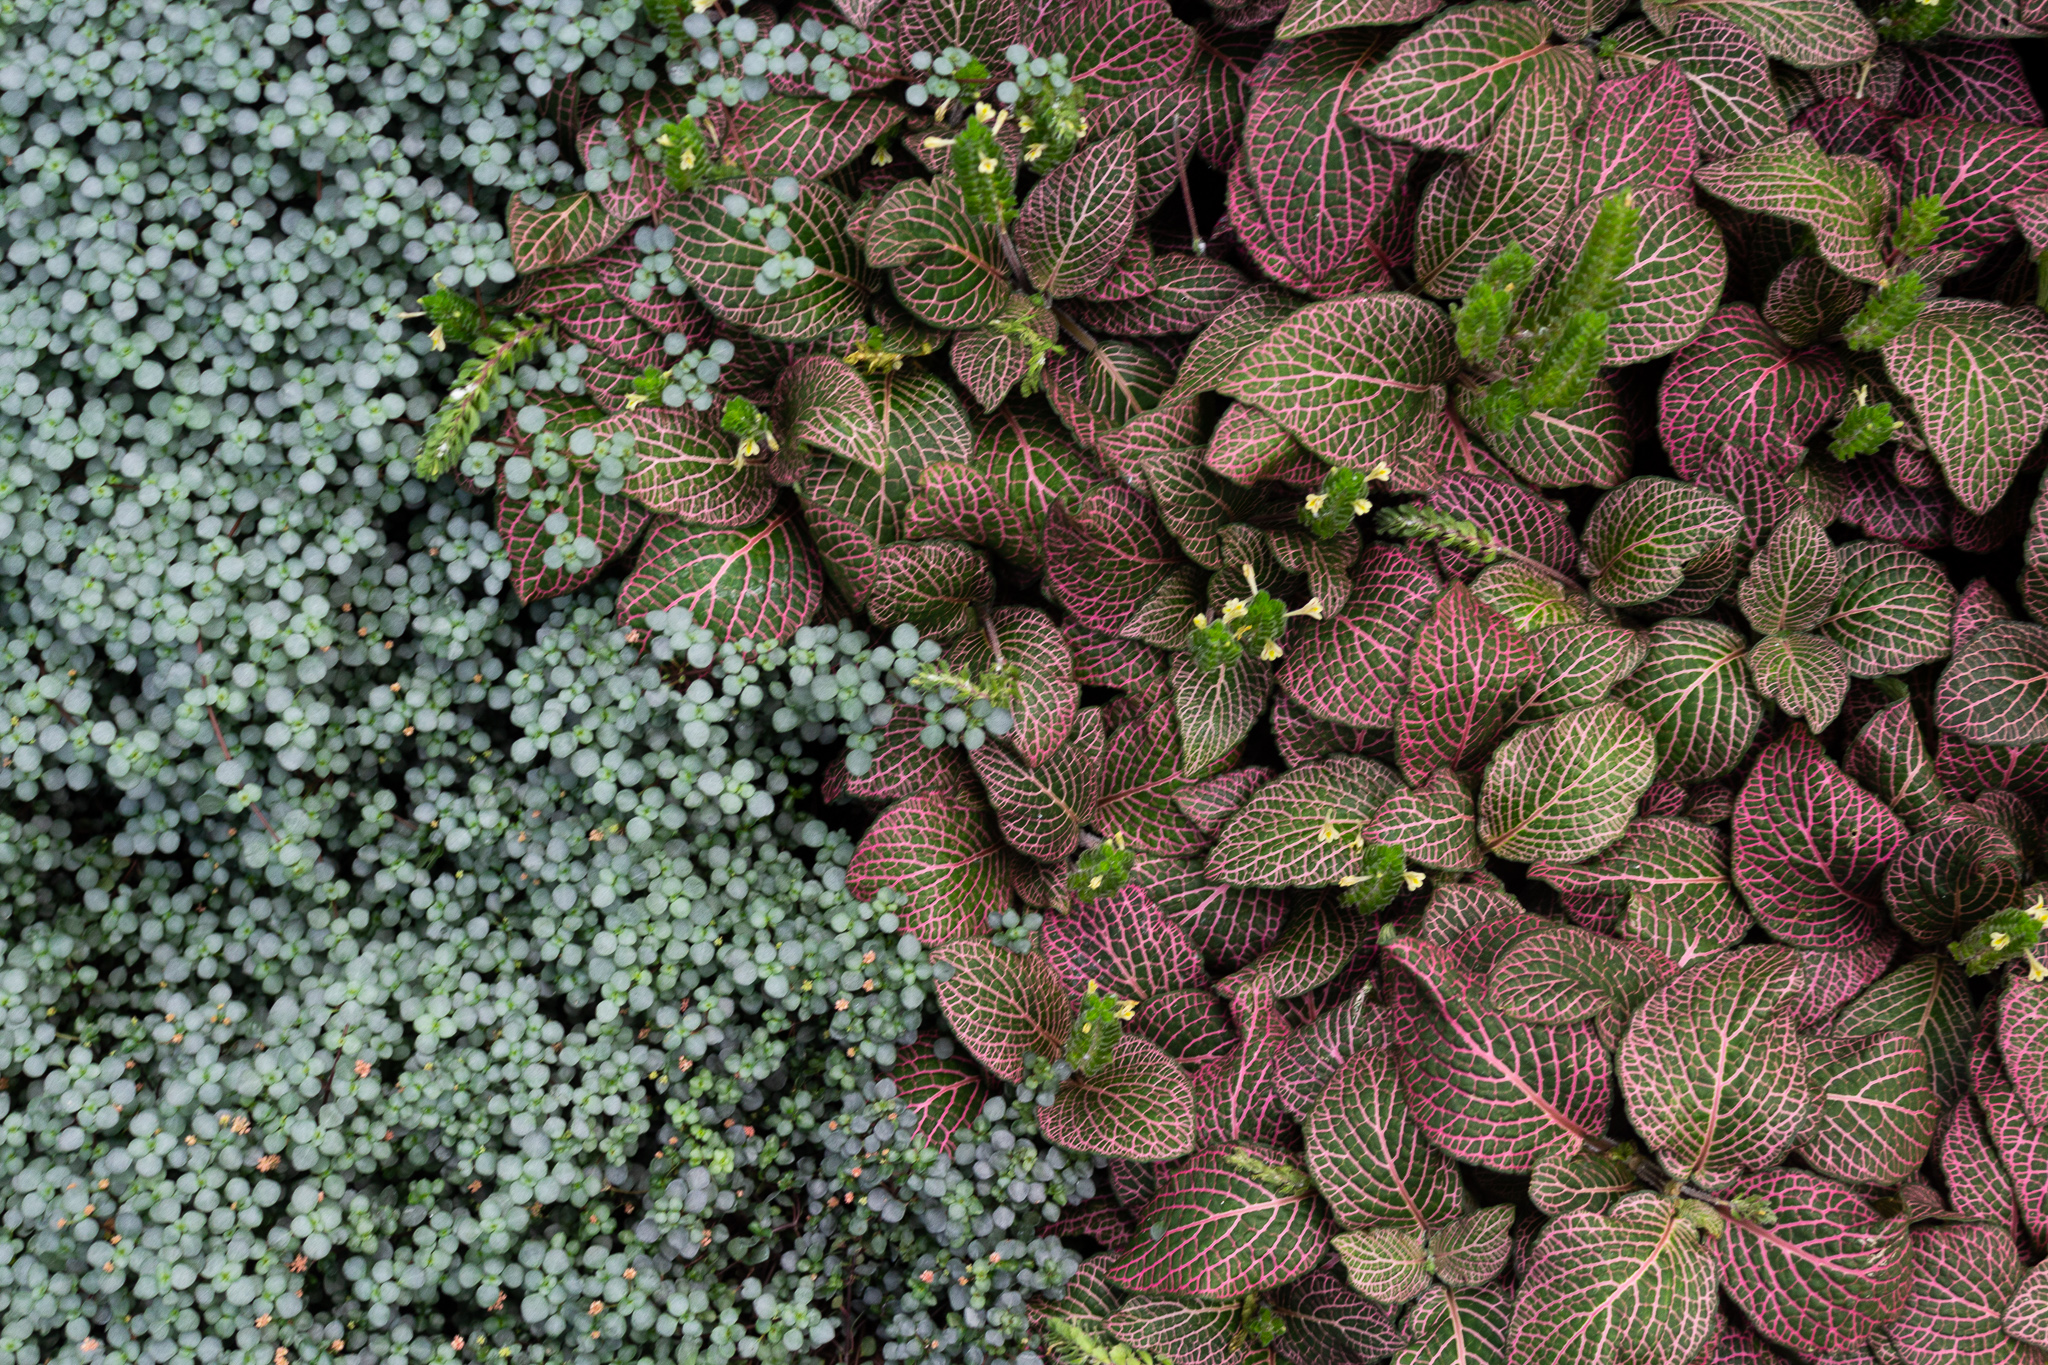 Ground covered with tiny, round, pale green plants on the left and on the right plants with pointed, dark, pink-veined leaves